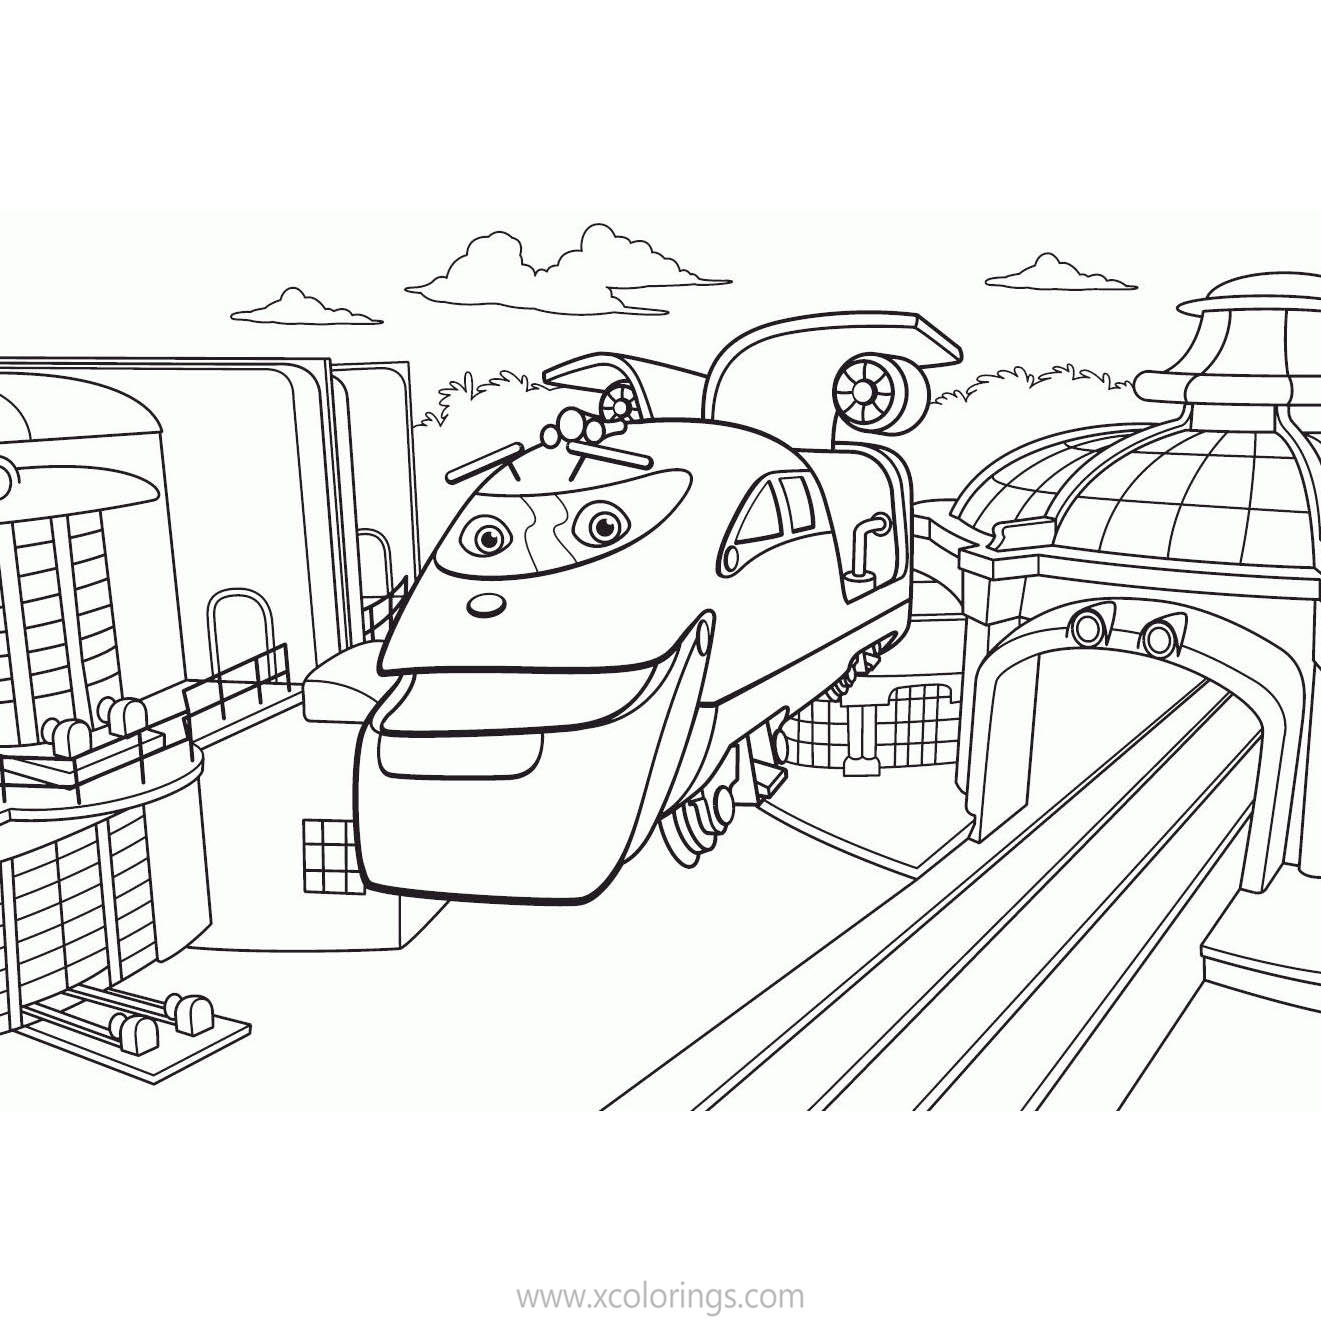 Free Chuggington Coloring Pages Action Chugger is Flying printable